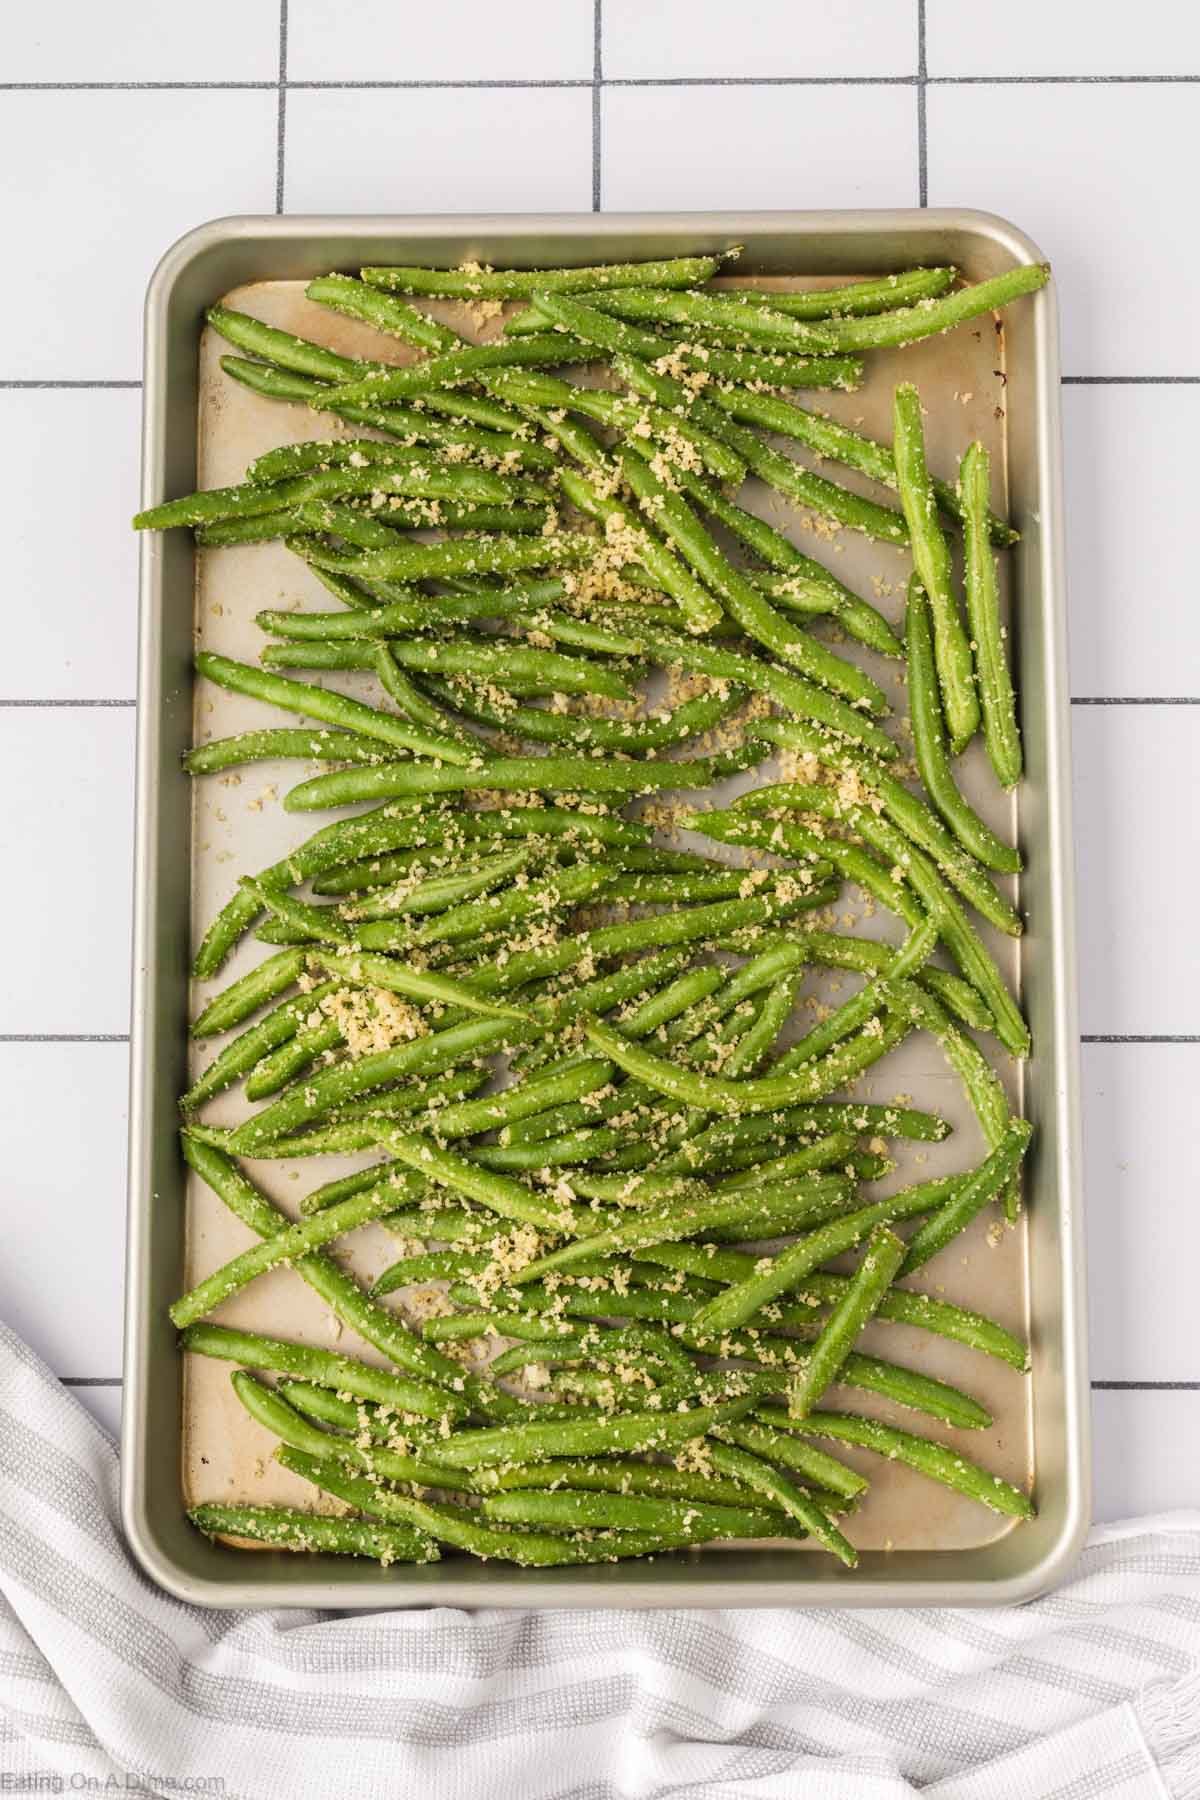 Spread the green beans on the baking sheet